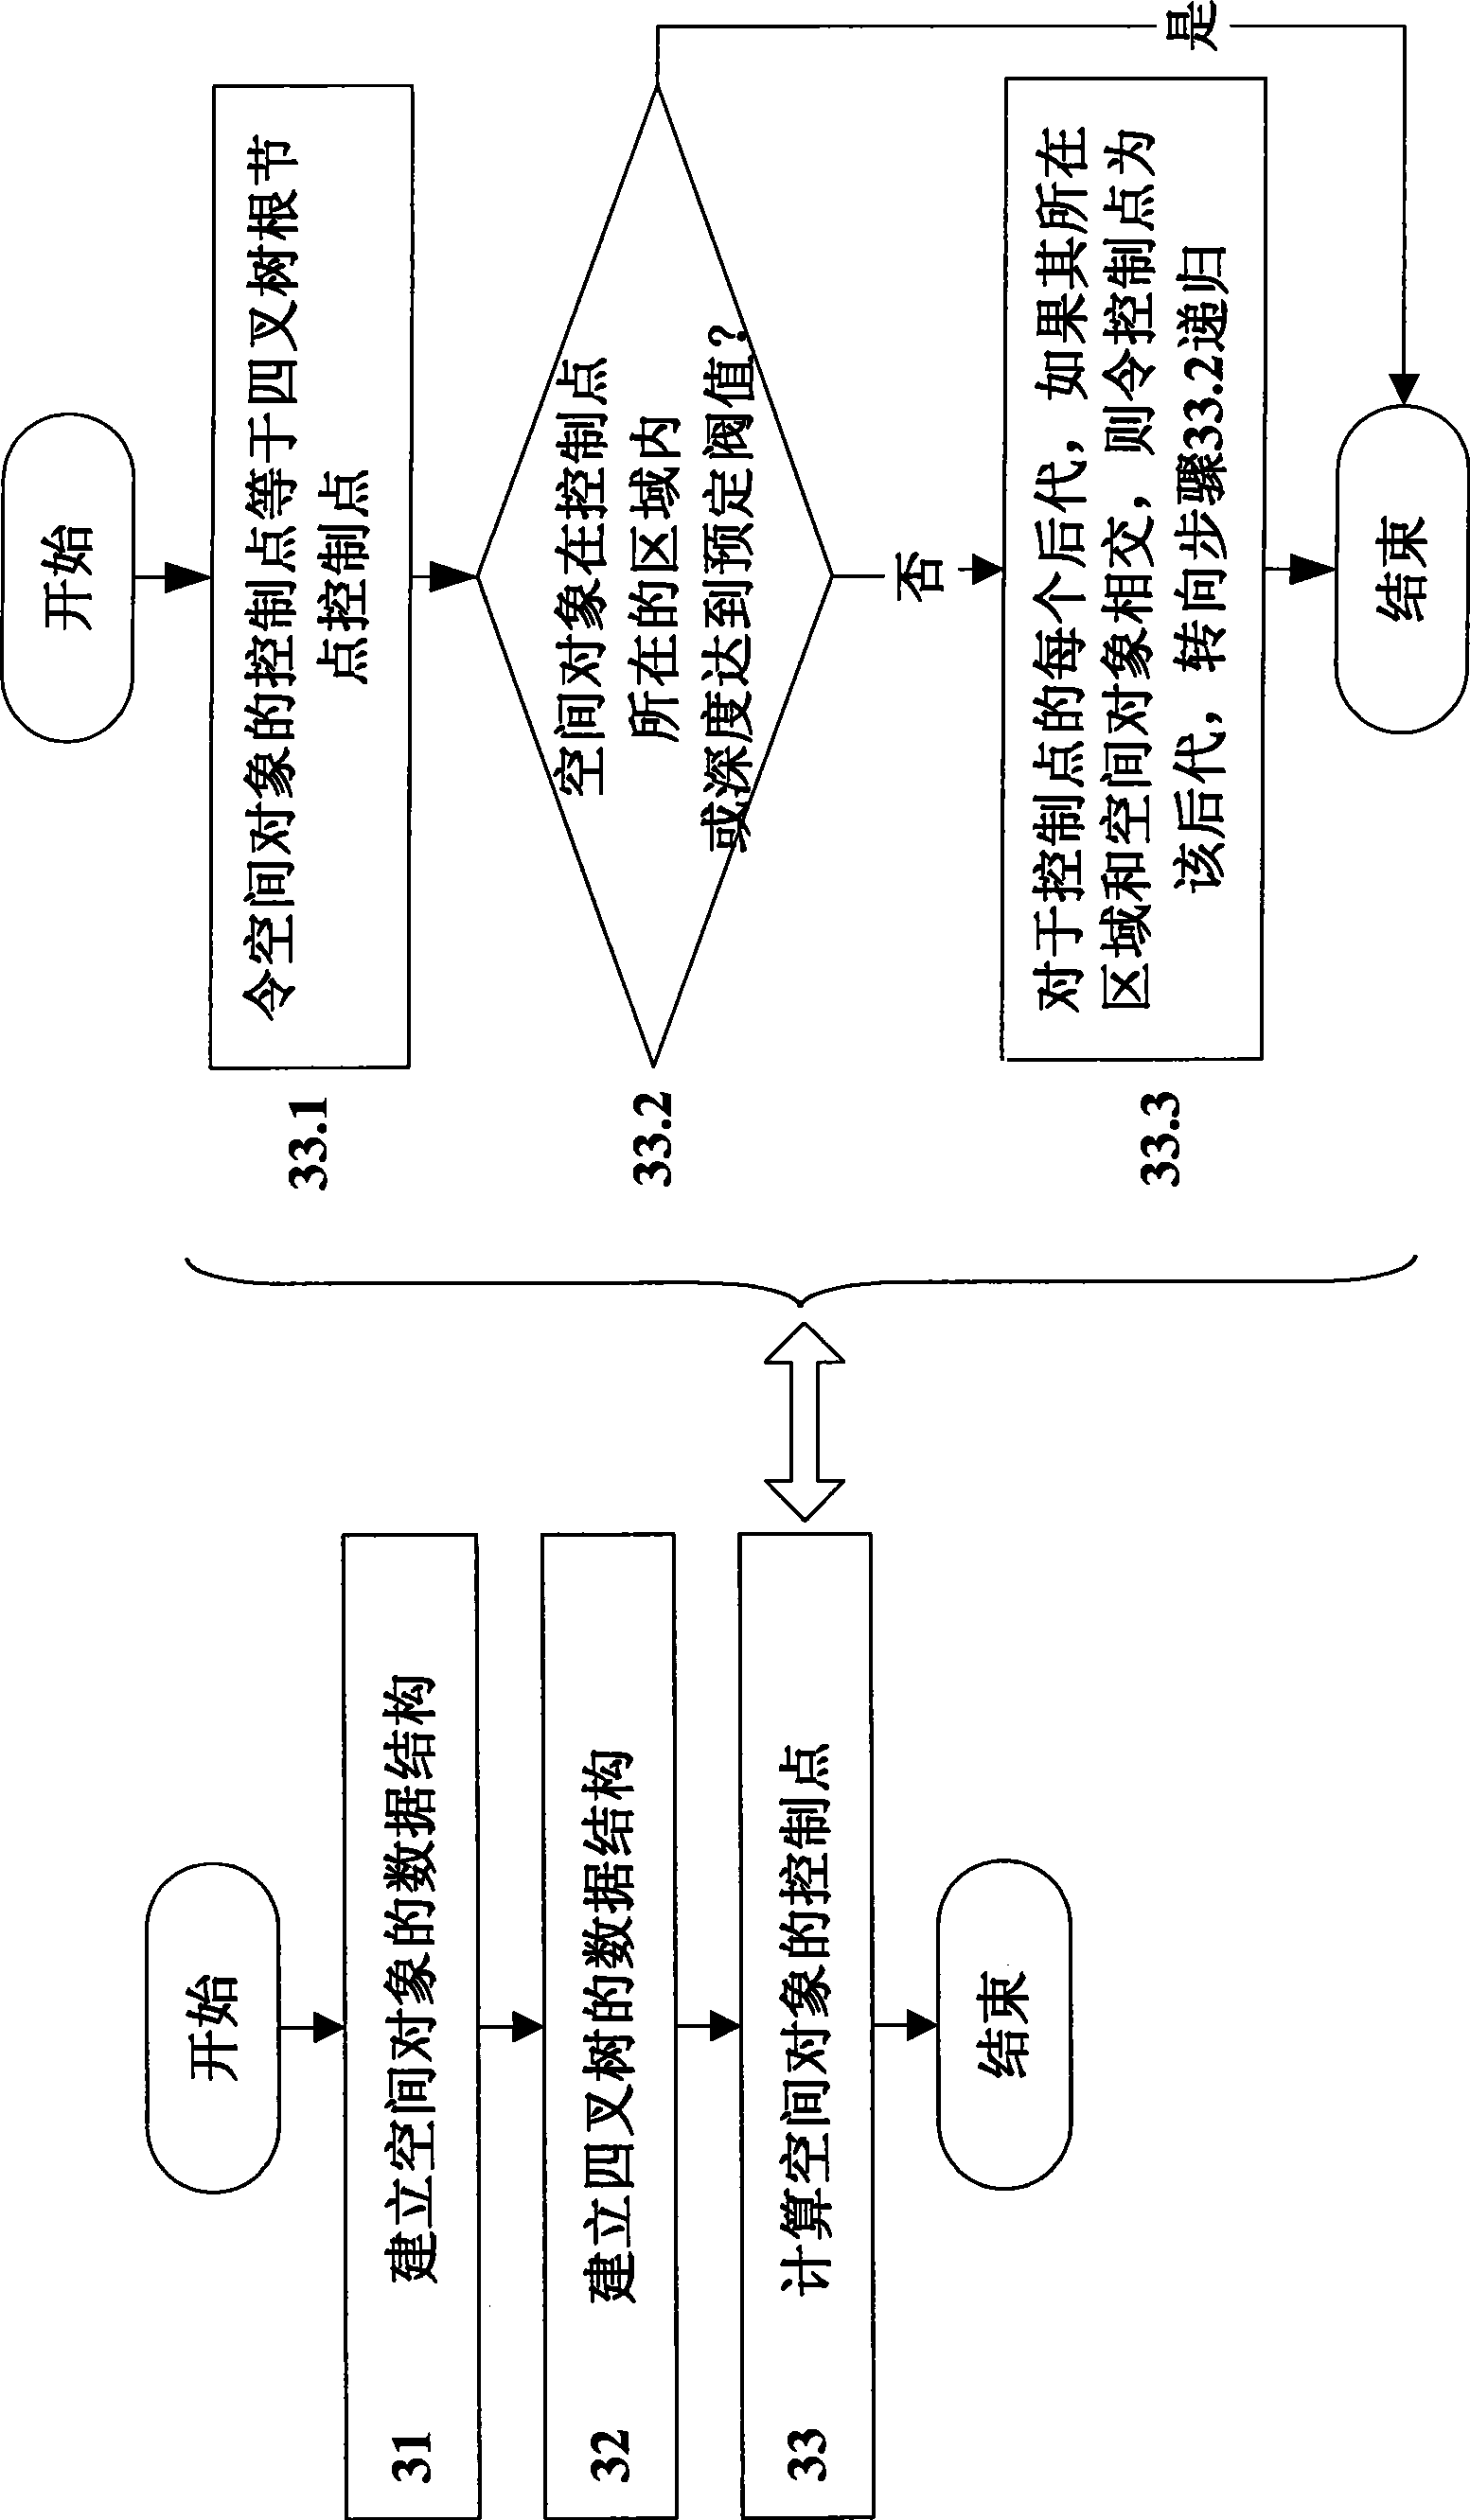 Large-scale space vector data management method based on content access network